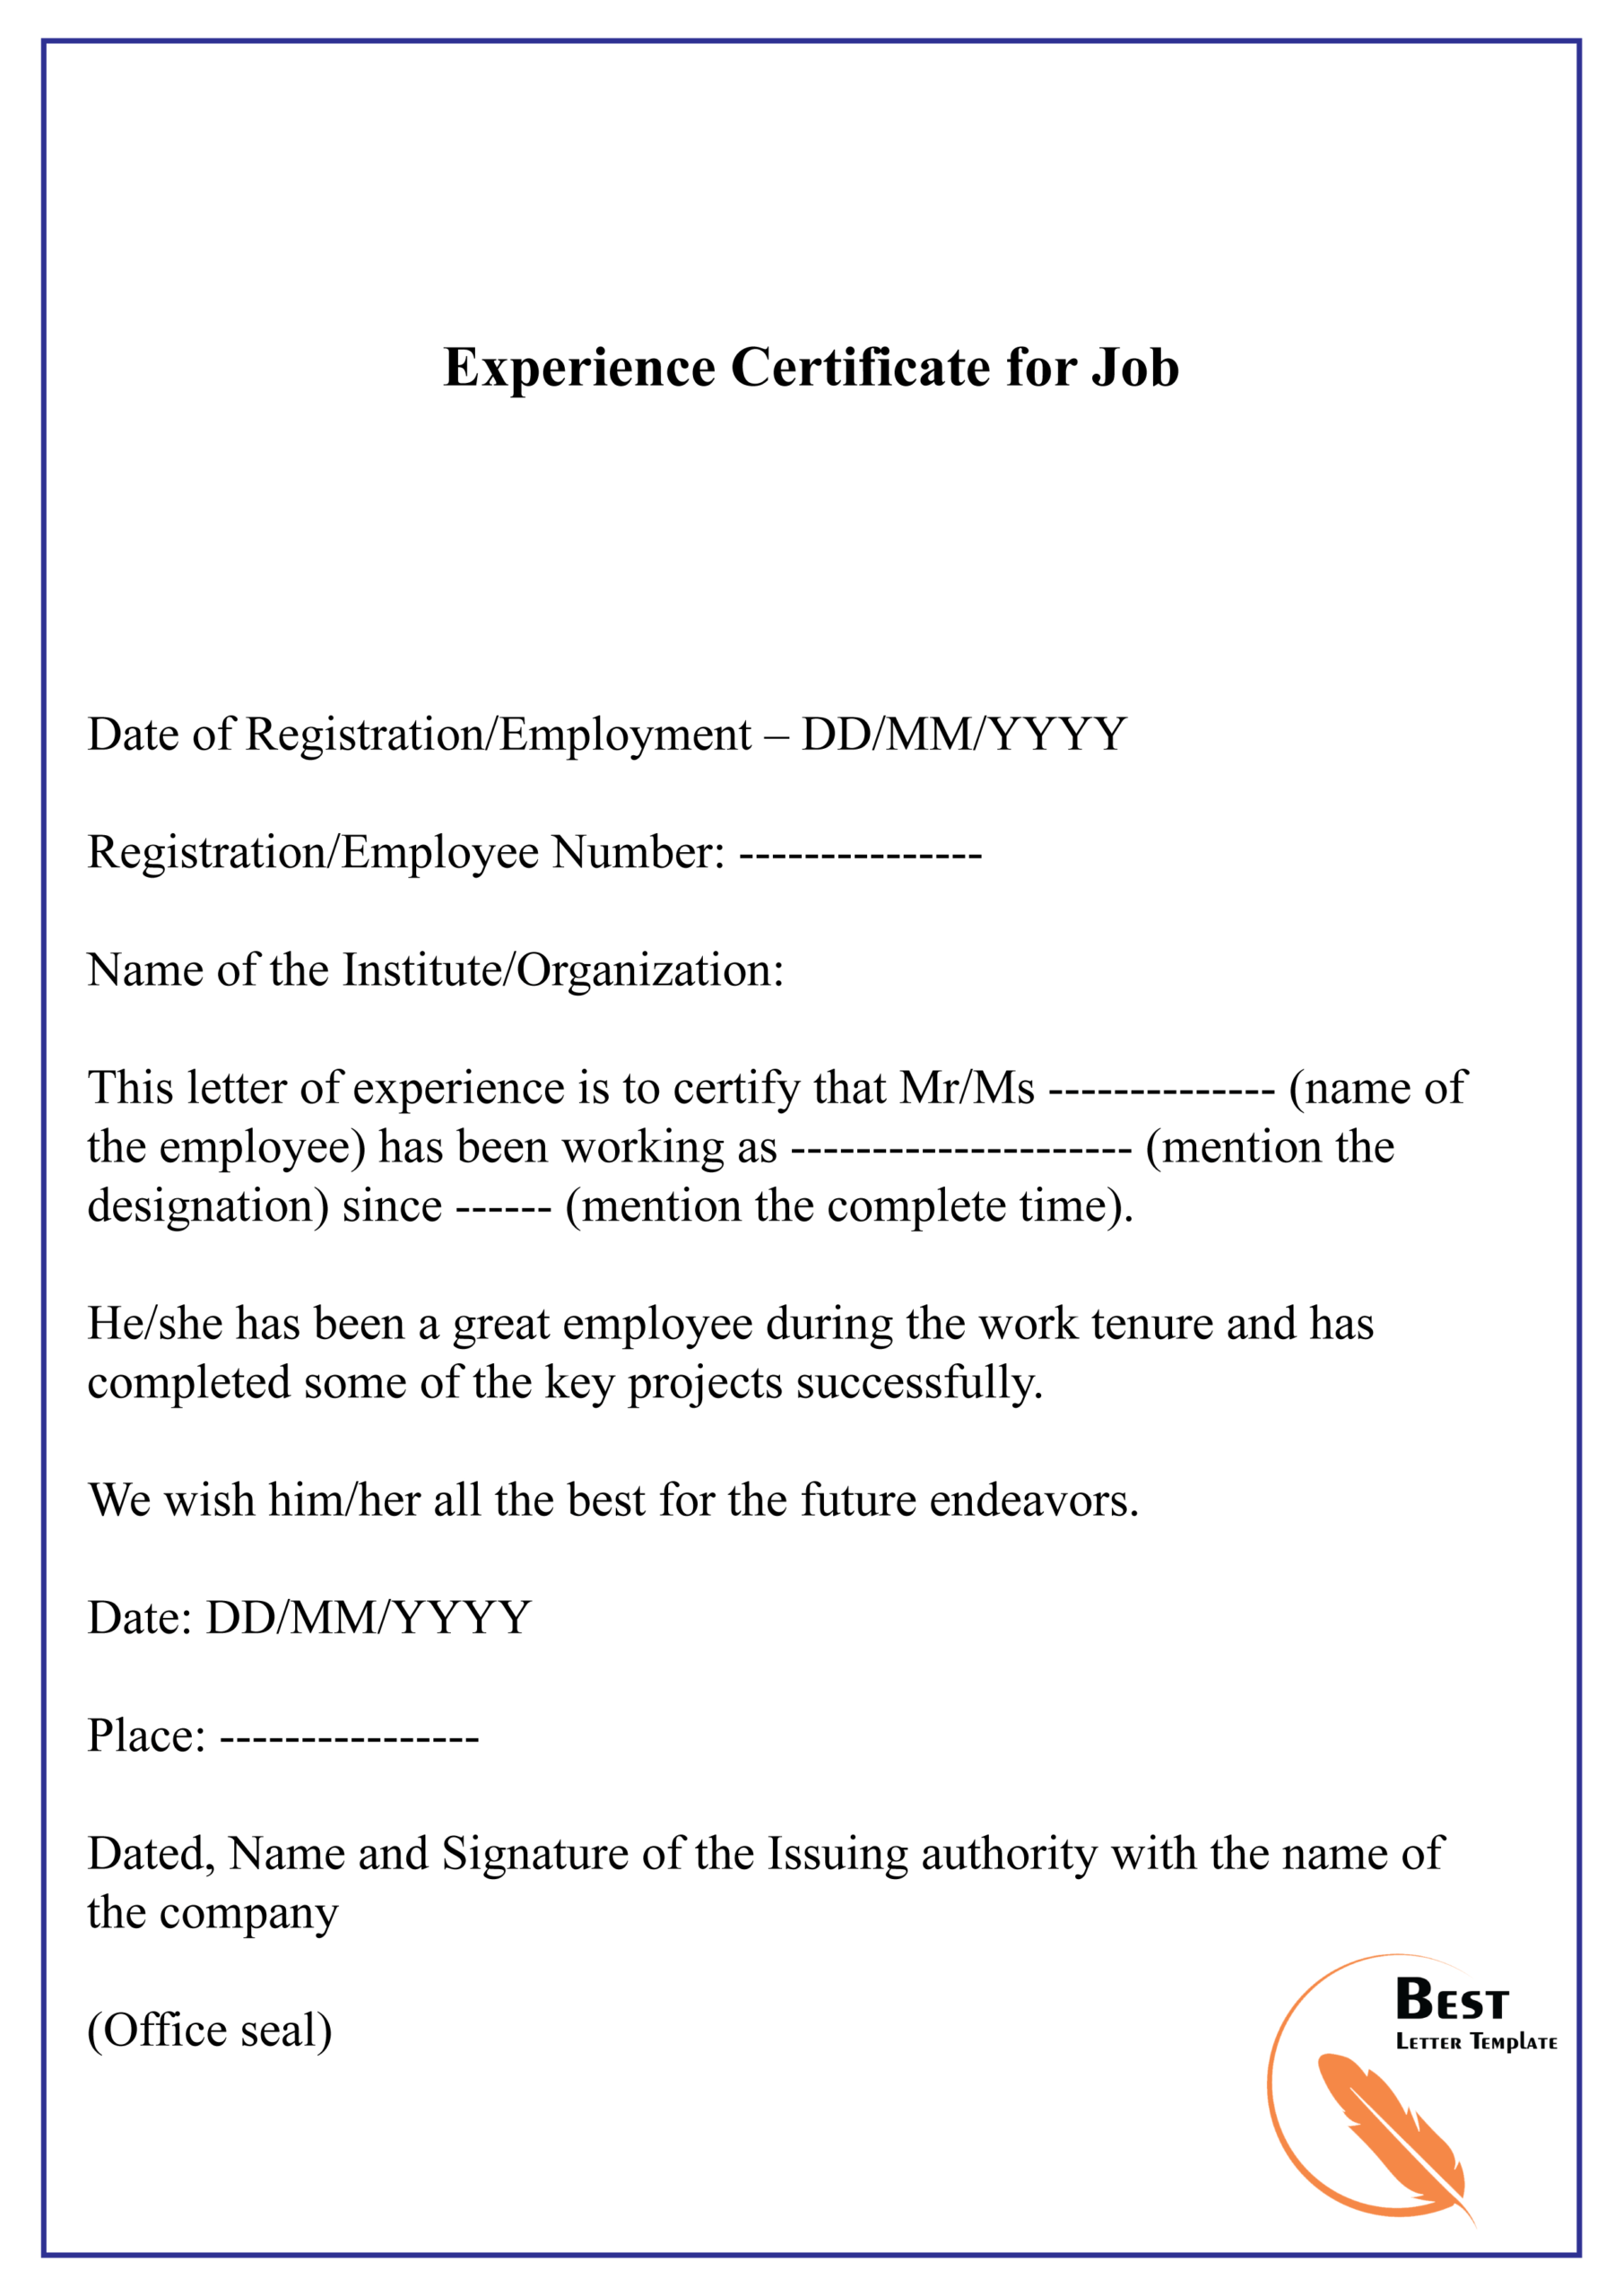 Experience Certificate For Job 01 | Best Letter Template Within Certificate Of Employment Template